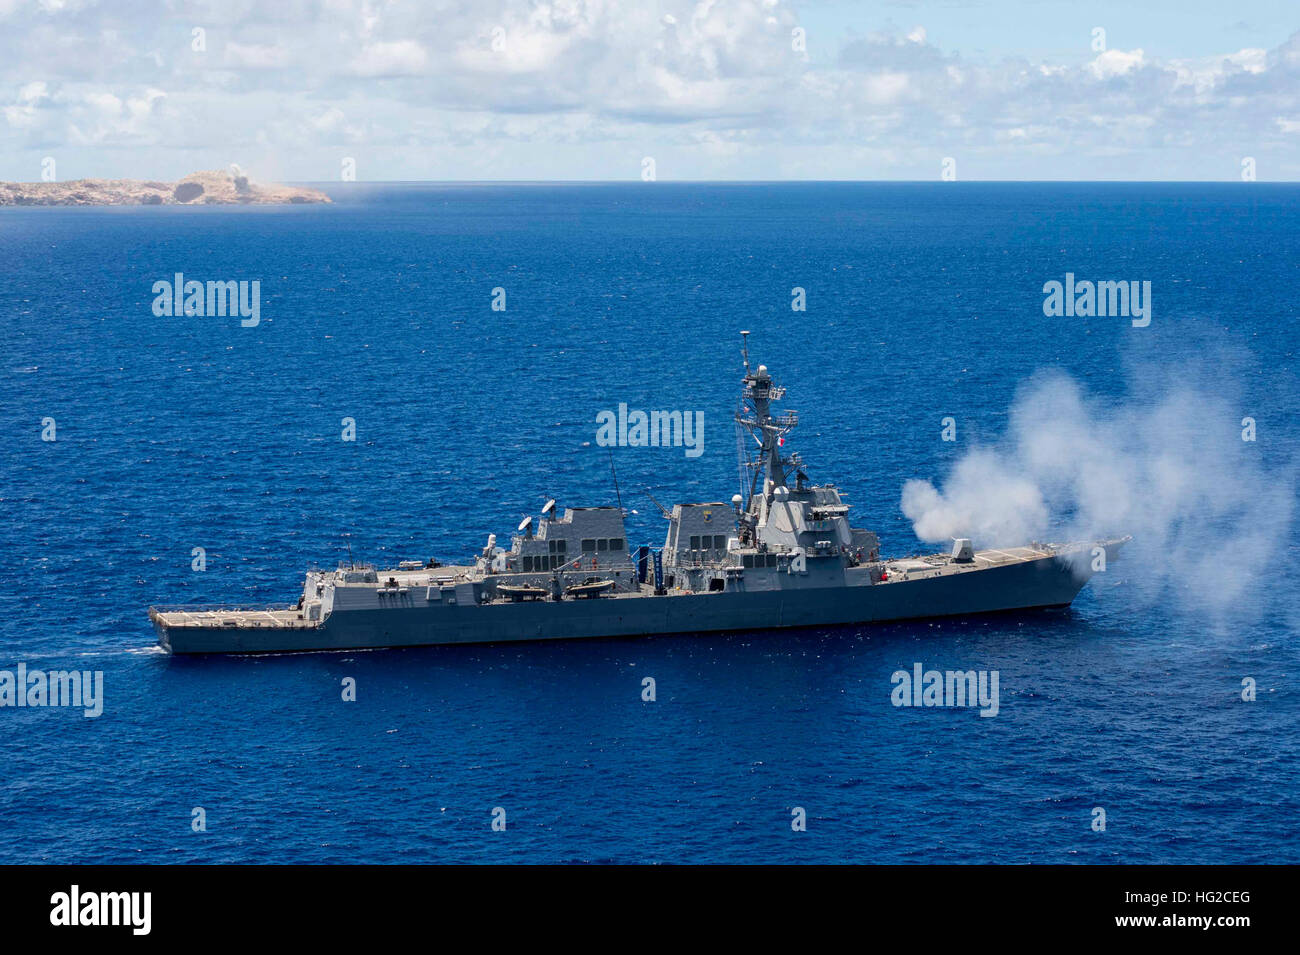 160615-N-SU278-1089 PACIFIC OCEAN (June 15, 2016) The guided-missile destroyer USS Spruance (DDG 111) fires it’s 5-inch gun at a targeting island during a joint-service targeting and bombing exercise with the U.S. Air Force. Spruance, along with the guided-missile destroyers USS Momsen (DDG 92) and USS Decatur (DDG 73), and embarked “Devil Fish” and “Warbirds” helicopter detachments of Maritime Strike Squadron 49 are deployed in support of maritime security and stability in the Indo-Asia-Pacific as part of a U.S. 3rd Fleet Pacific Surface Action Group (PAC SAG) under Commander, Destroyer Squad Stock Photo